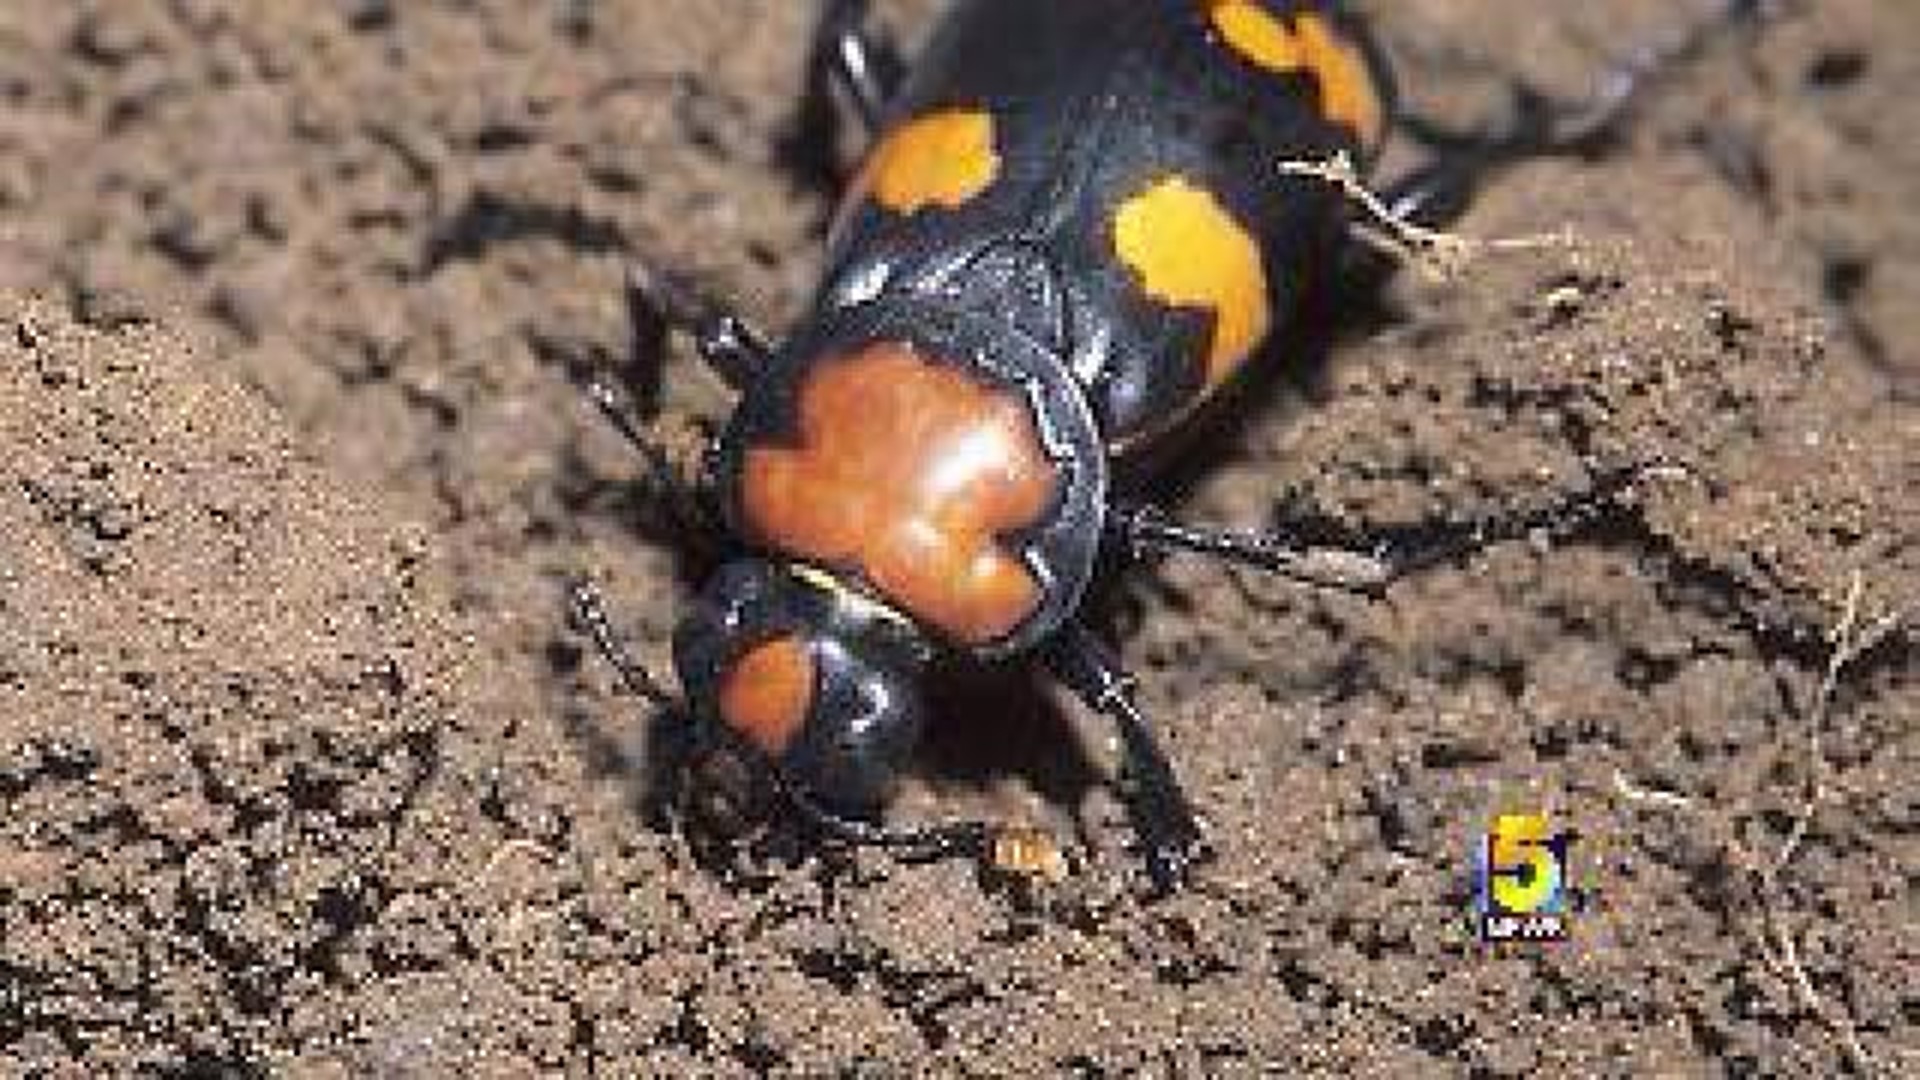 Endangered Beetle Believed to be at Construction Site